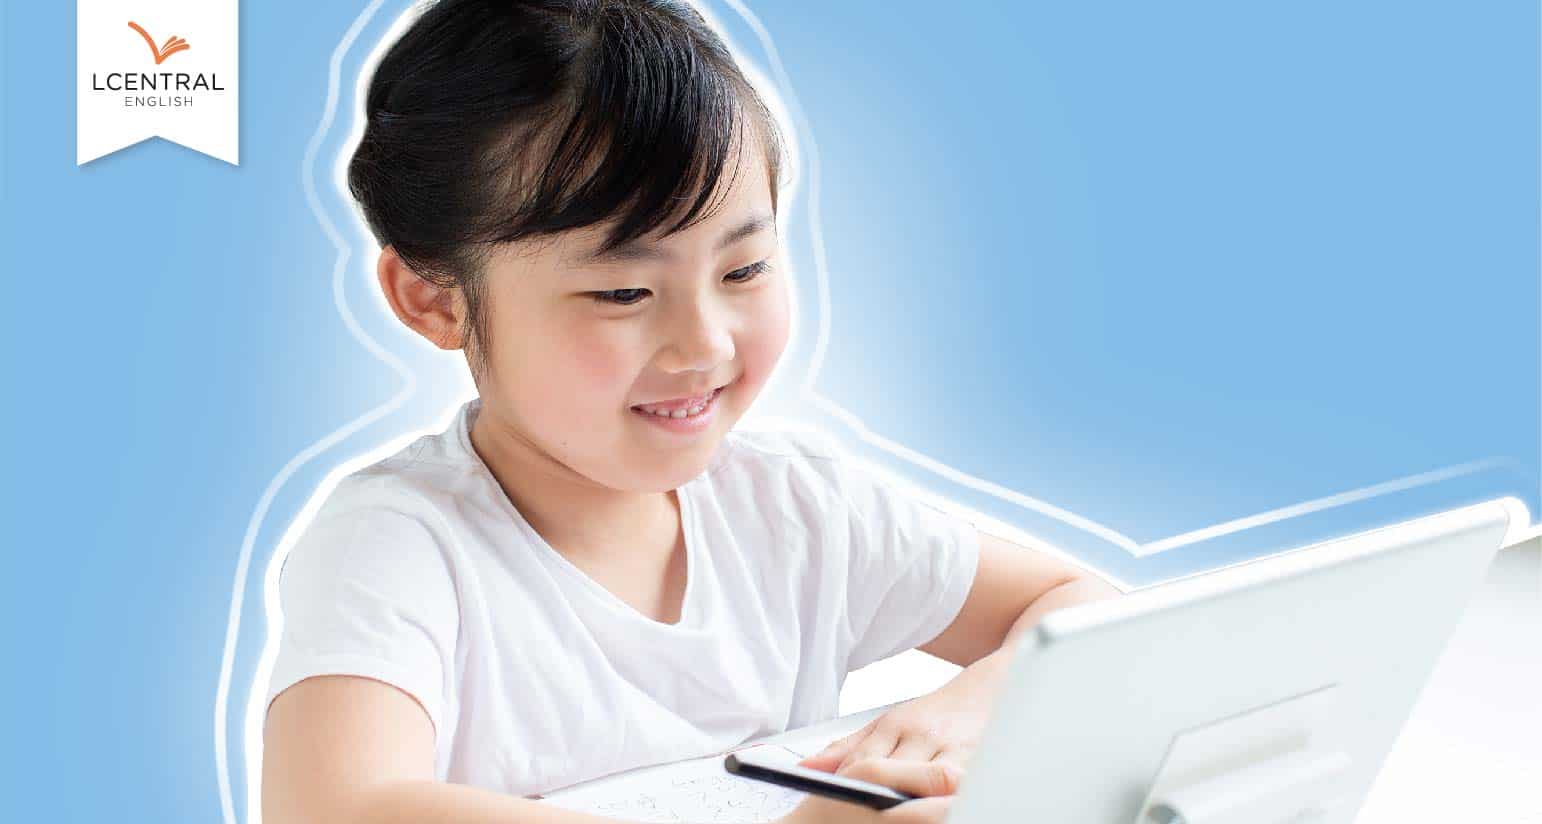 LCentral English Enrichment Tuition Singapore  Getting the most out of screen time HBL and high-quality screen time